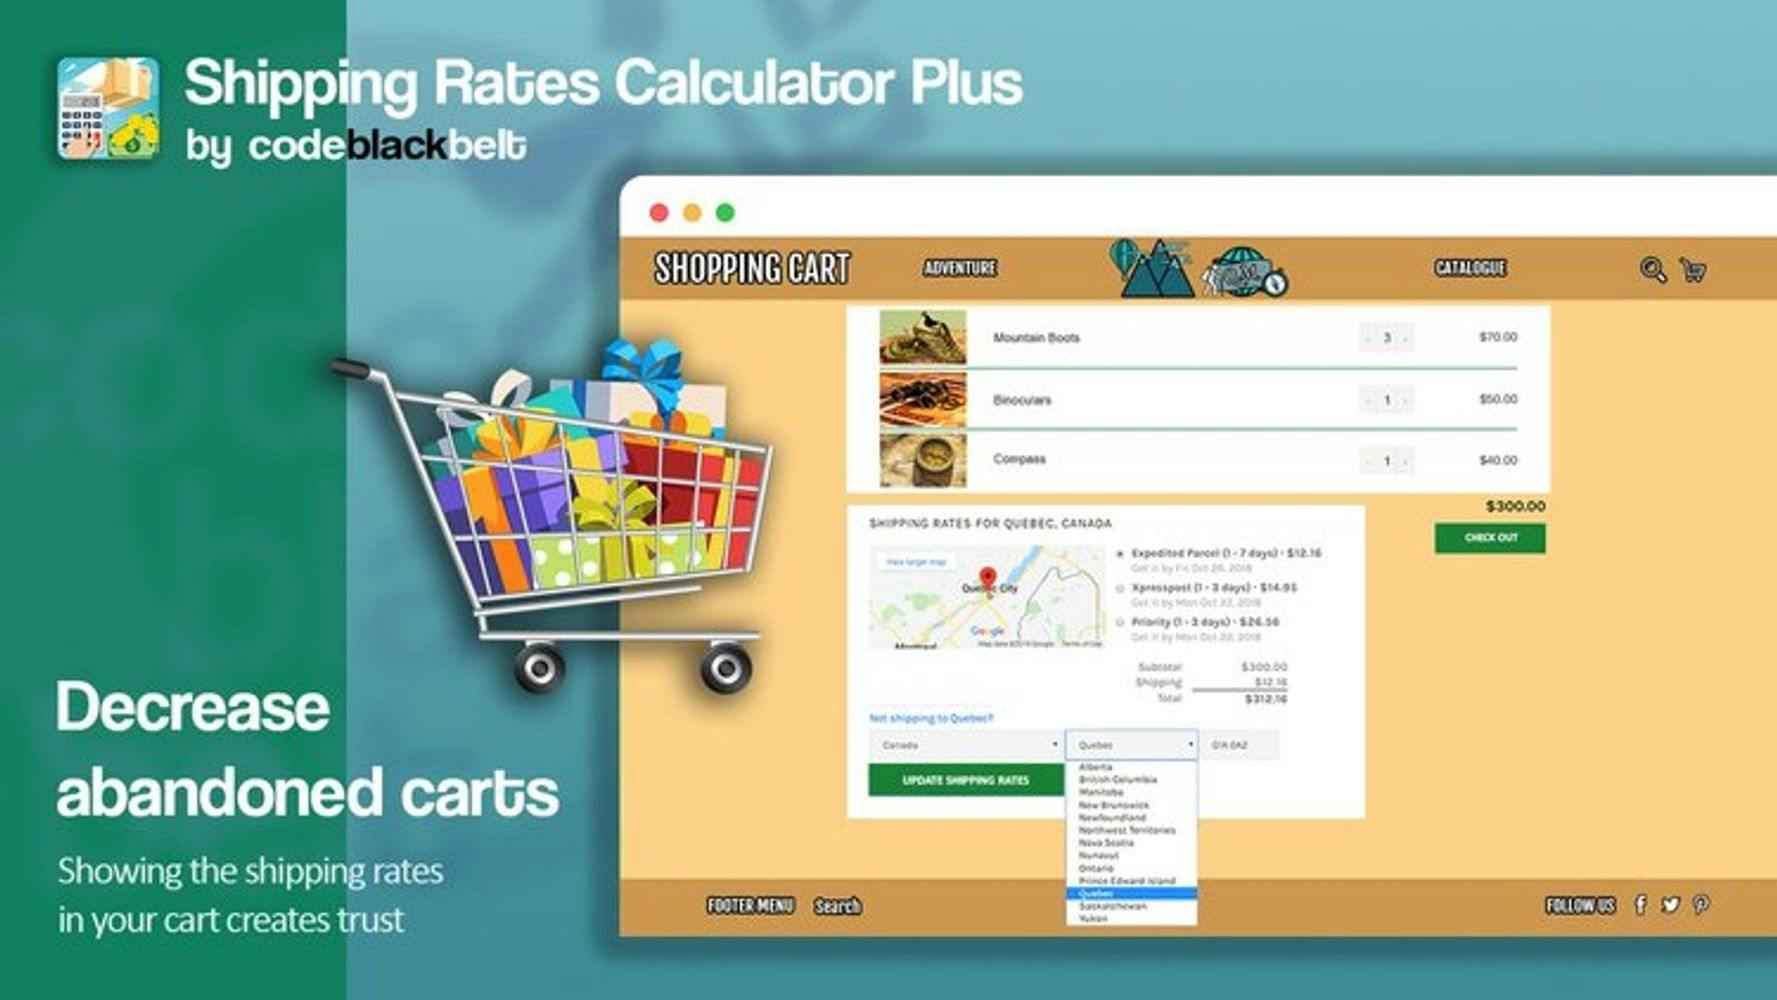 Top 10 shipping apps recommended for Shopify: Shipping Rates Calculator Plus